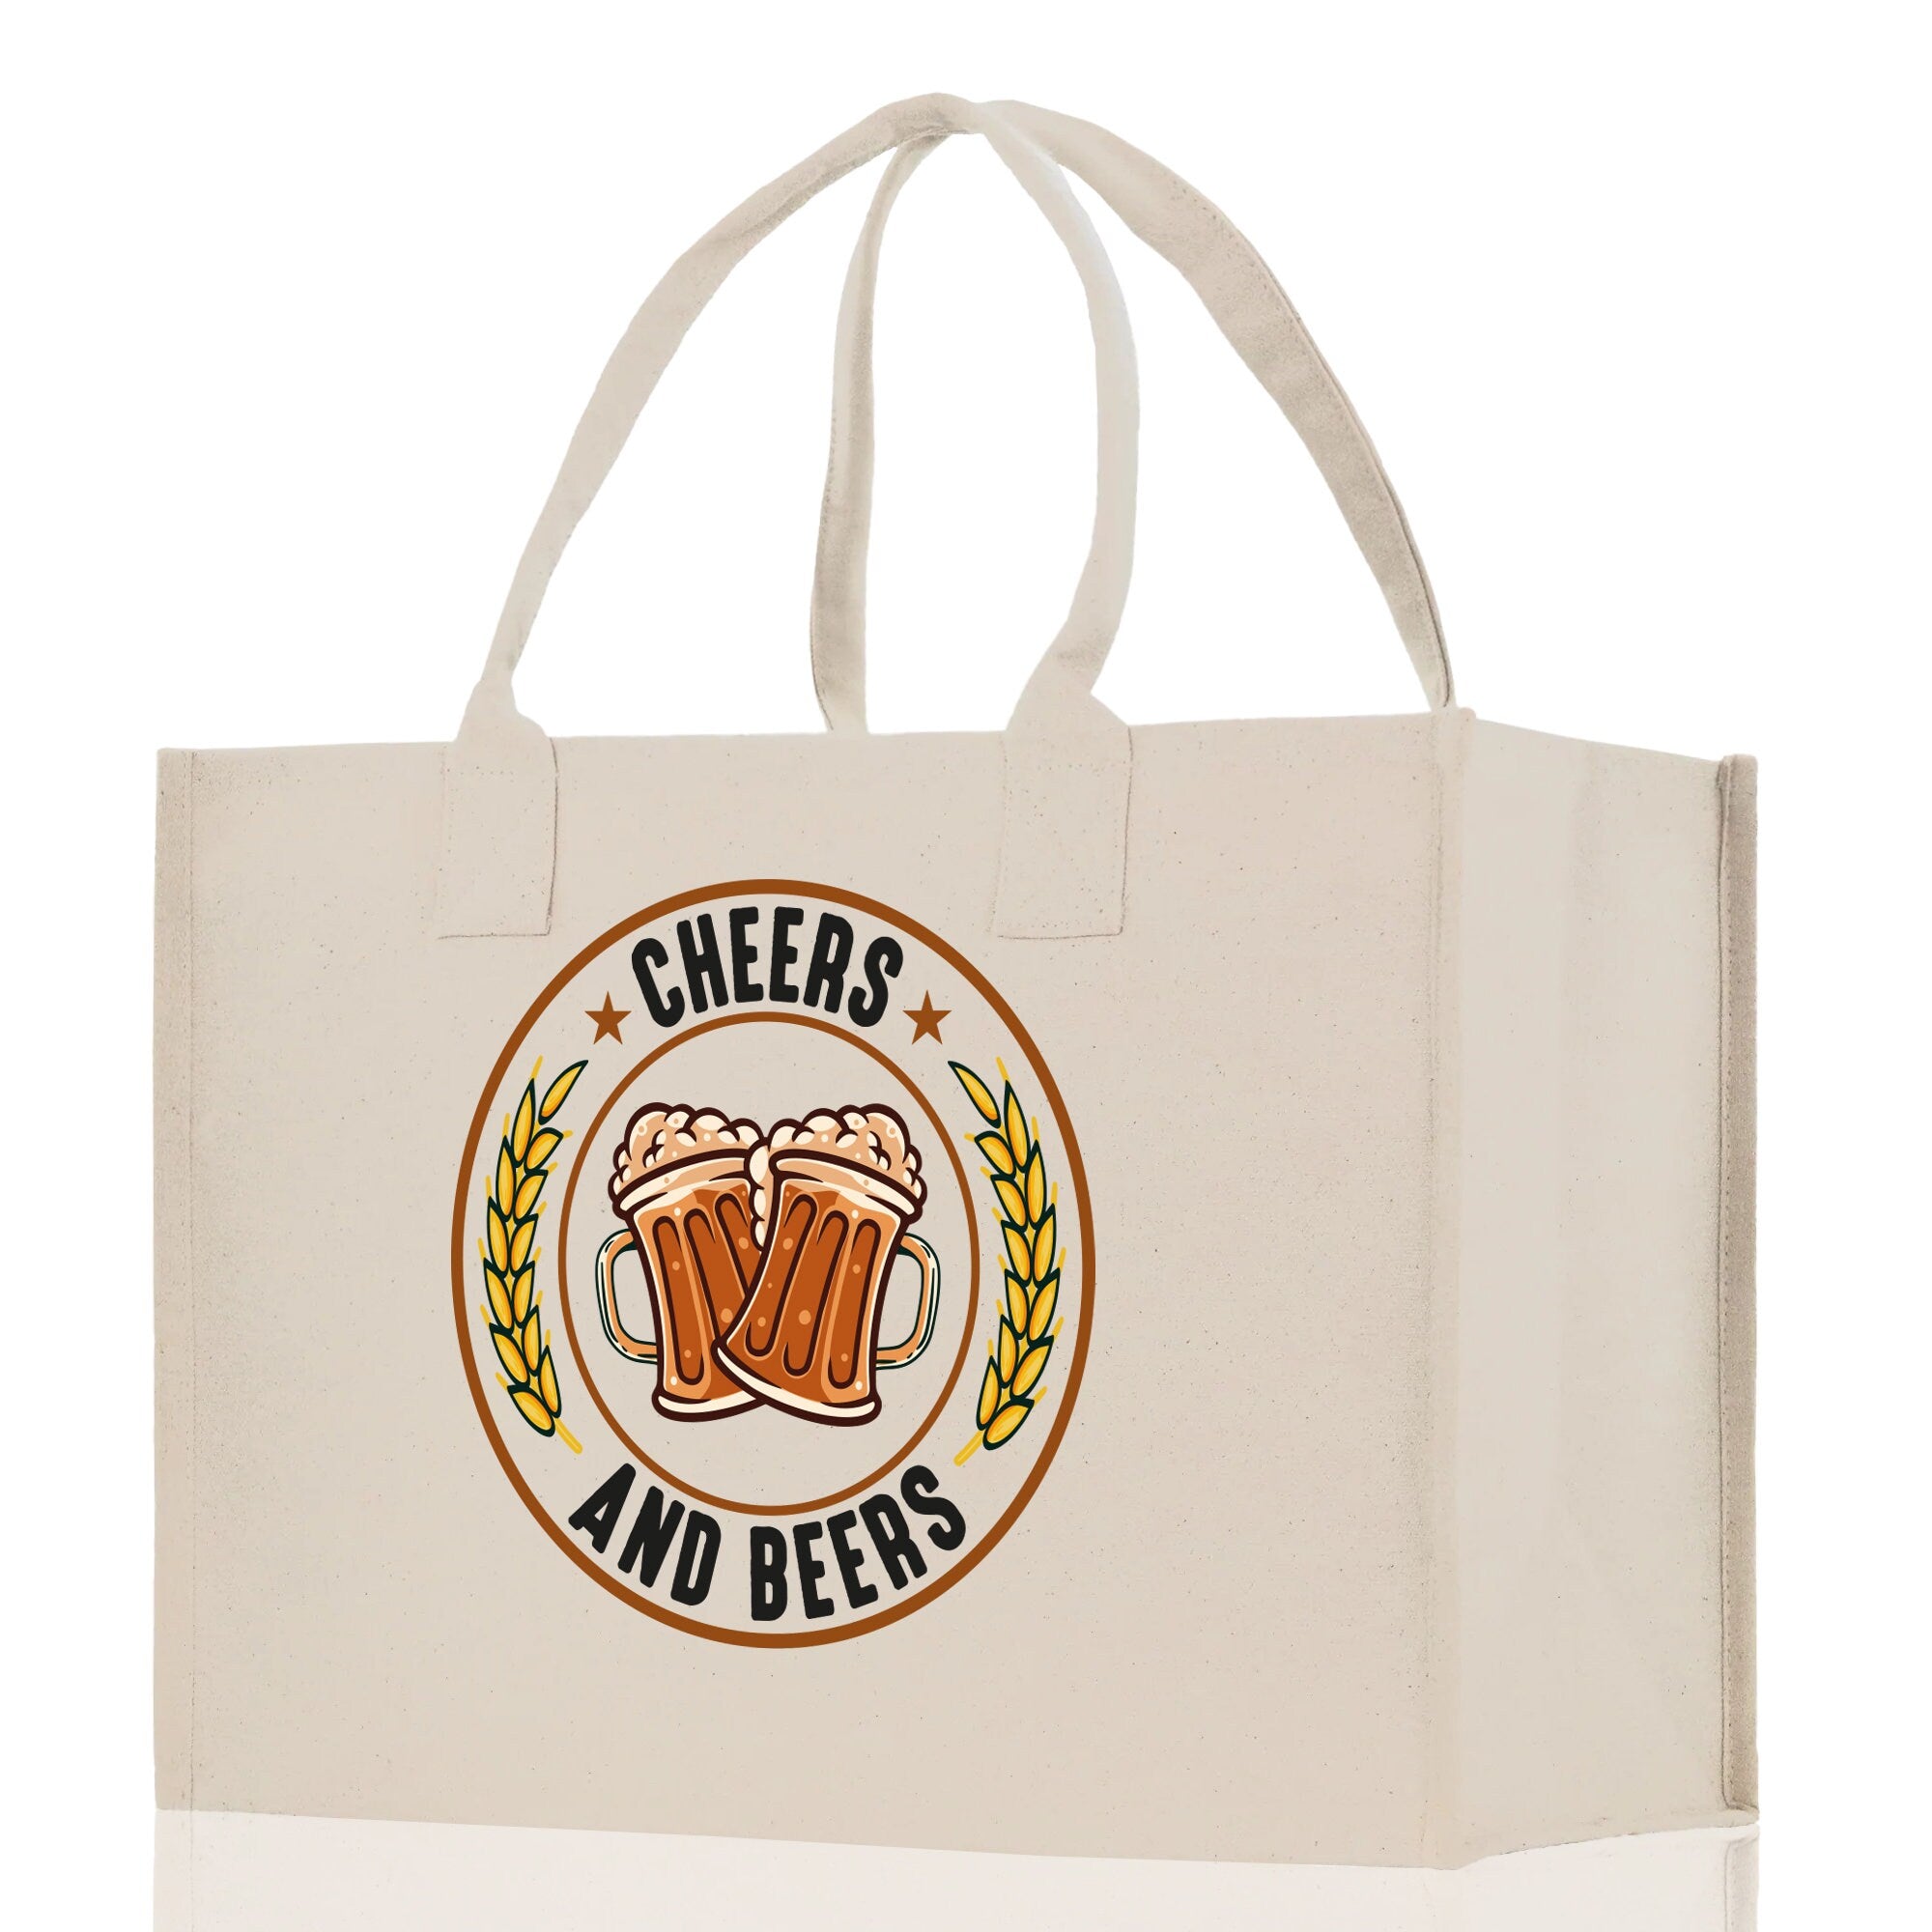 Cheers And Beers Cotton Canvas Tote Bag for German Octoberfest Beer Festival Party Bag Beer Lovers Gift Bag